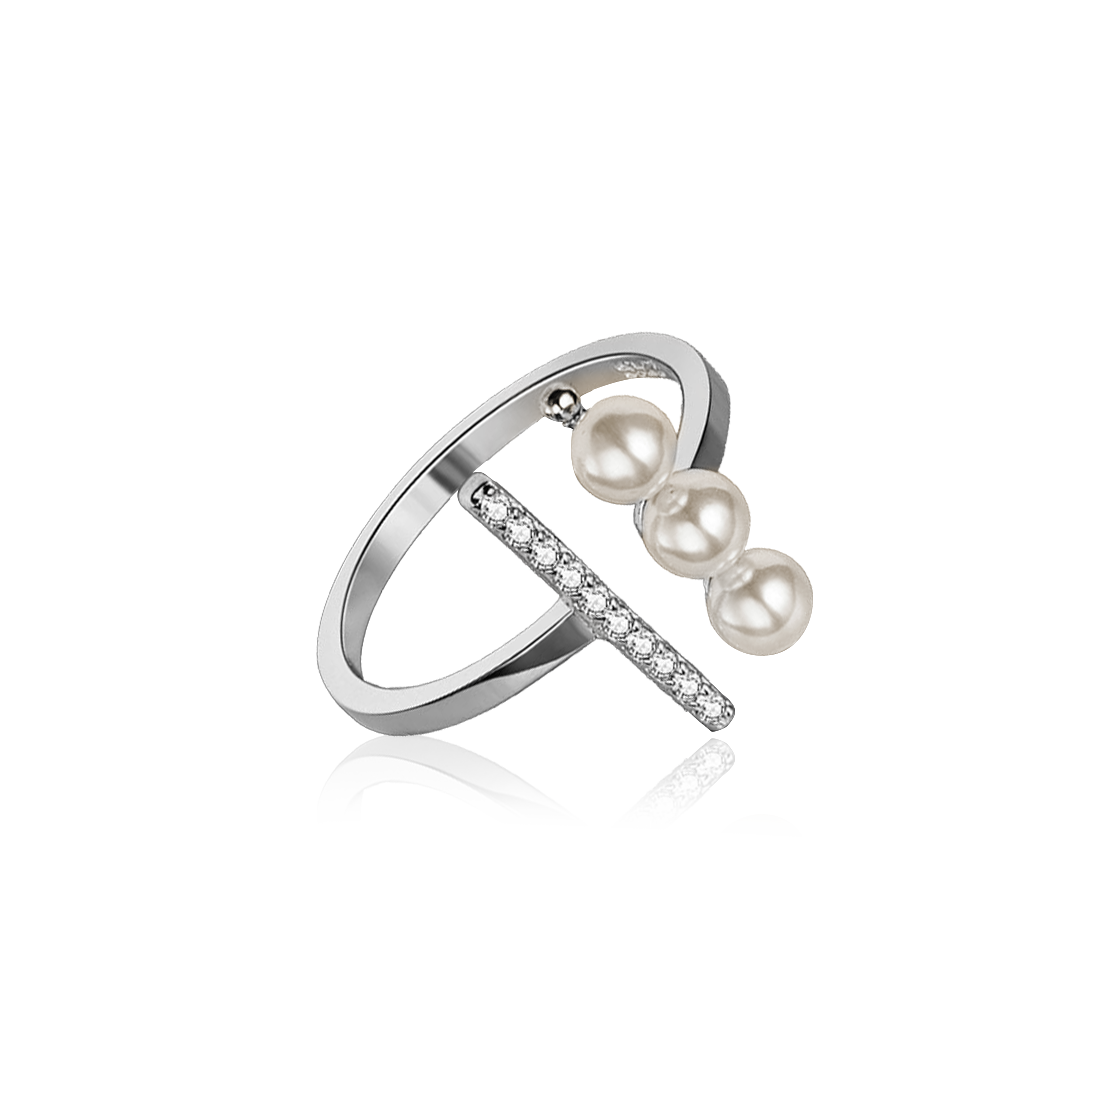 Sabrina Ring – Silver with Freshwater Pearls